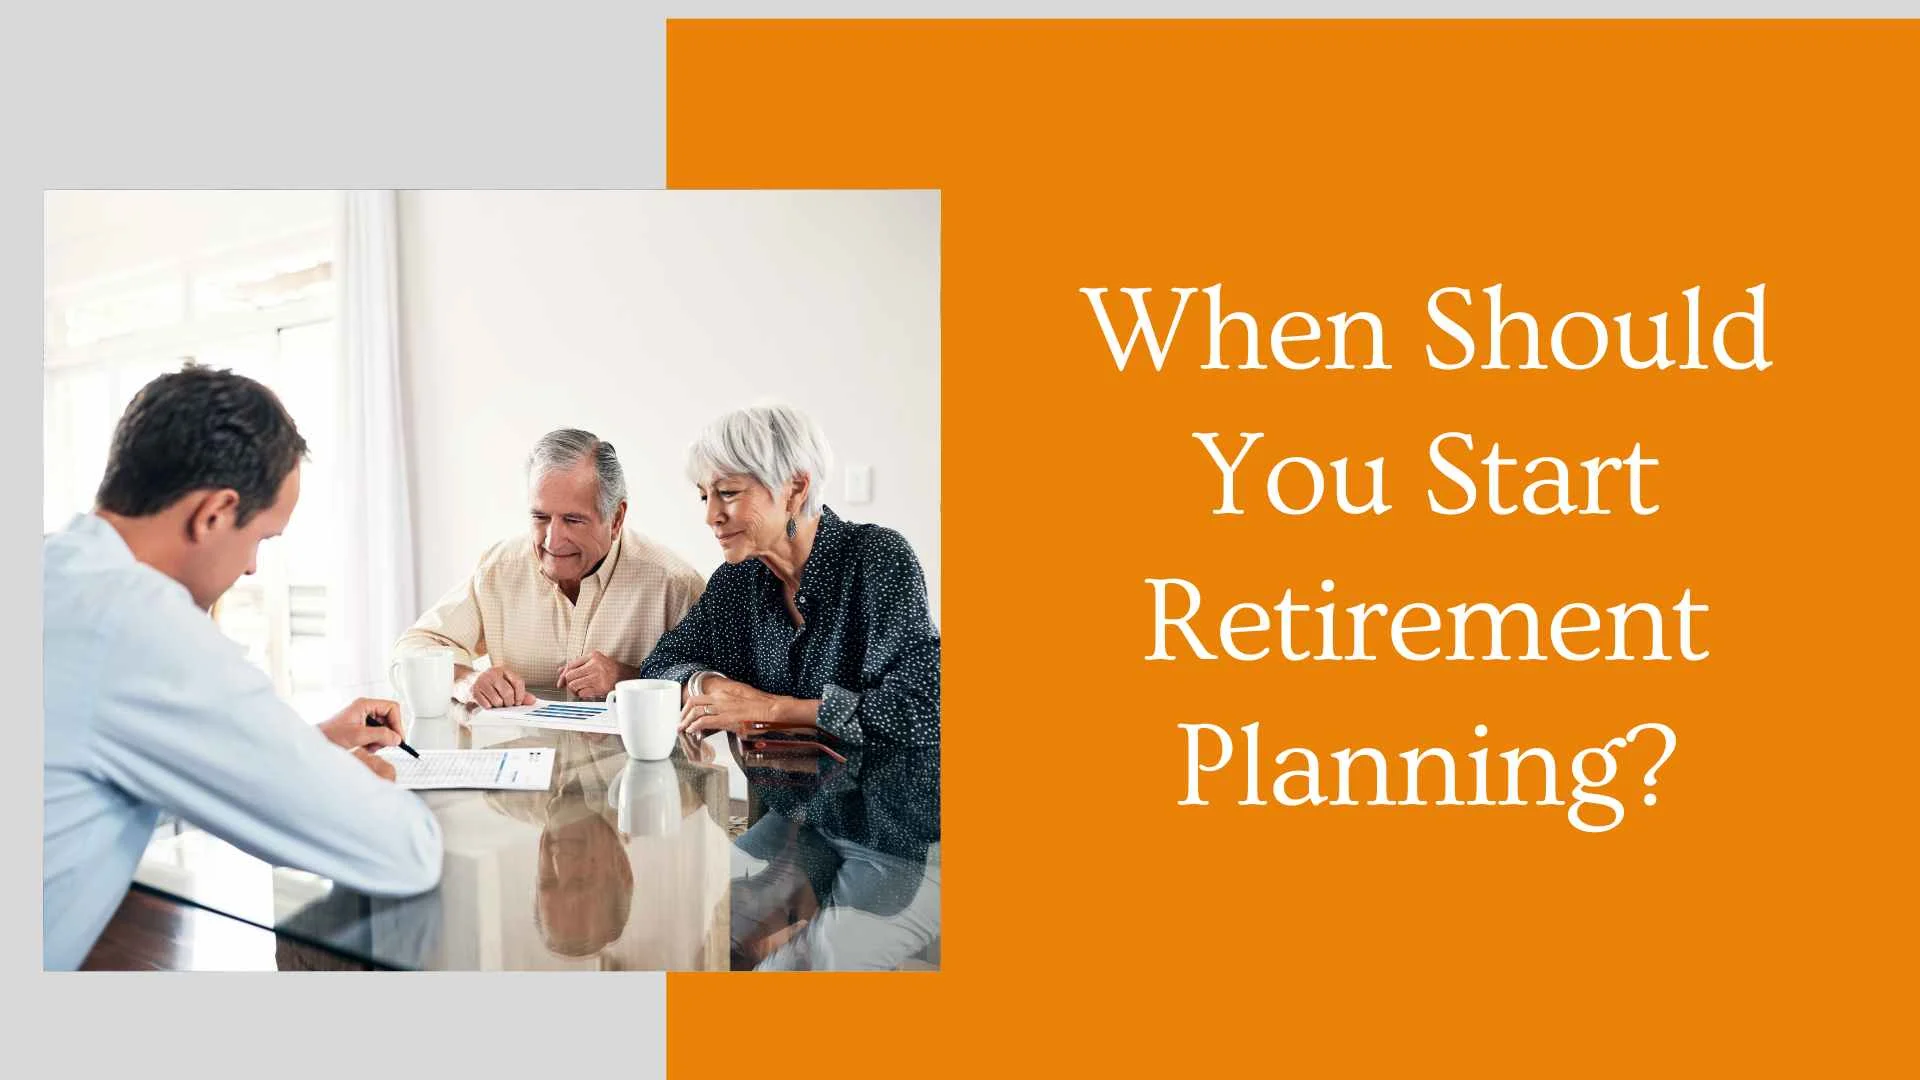 When Should You Start Retirement Planning